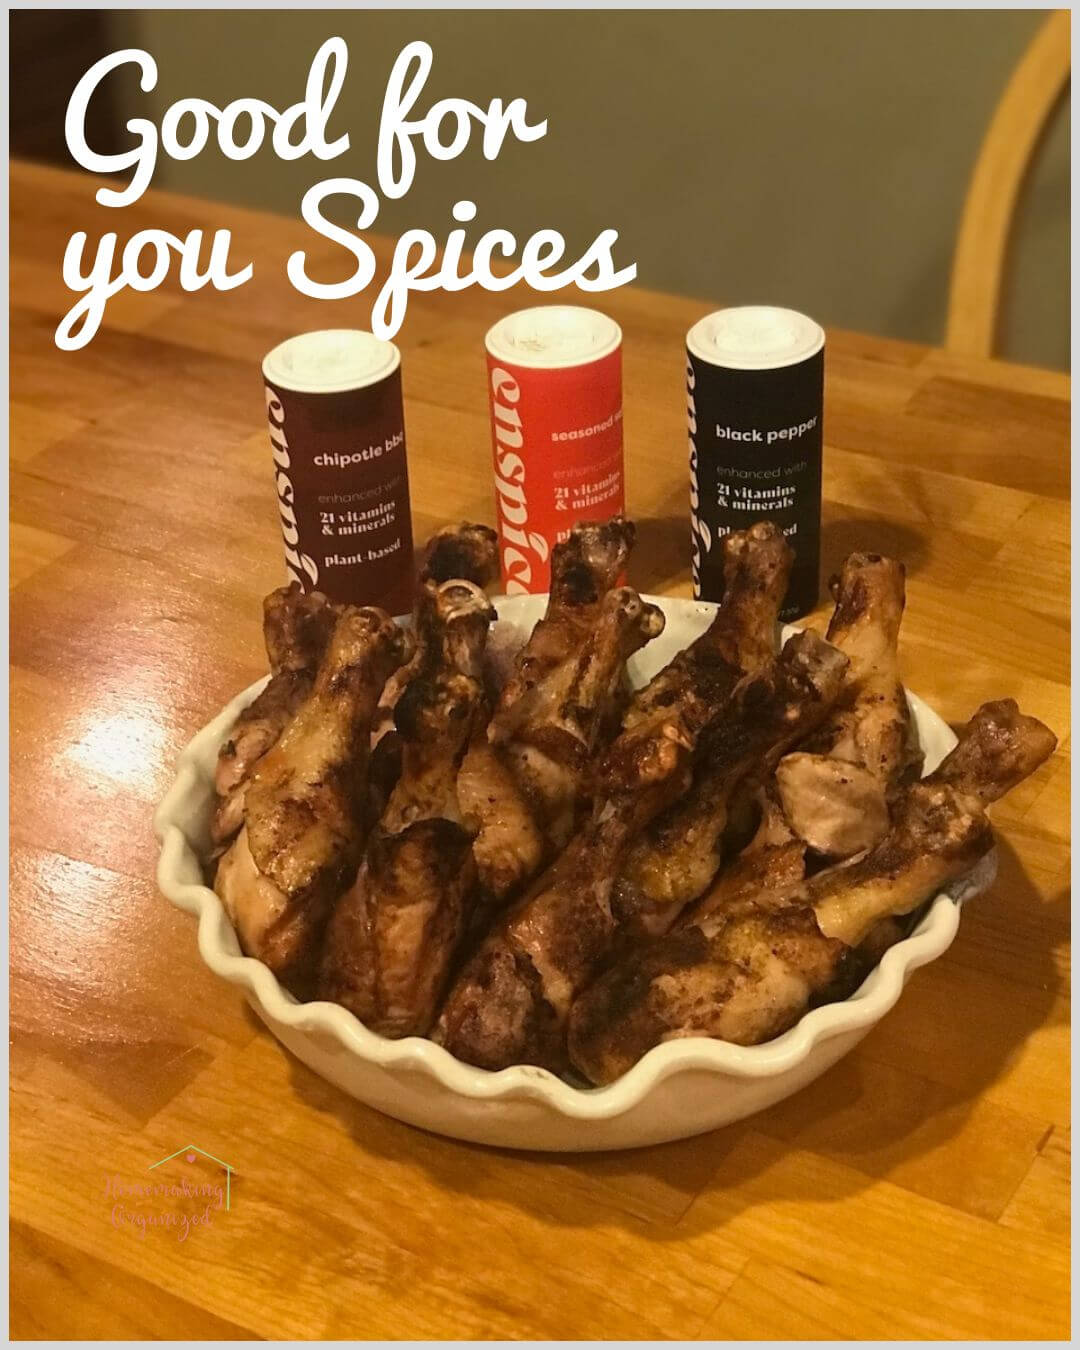 Enspice spices on chicken